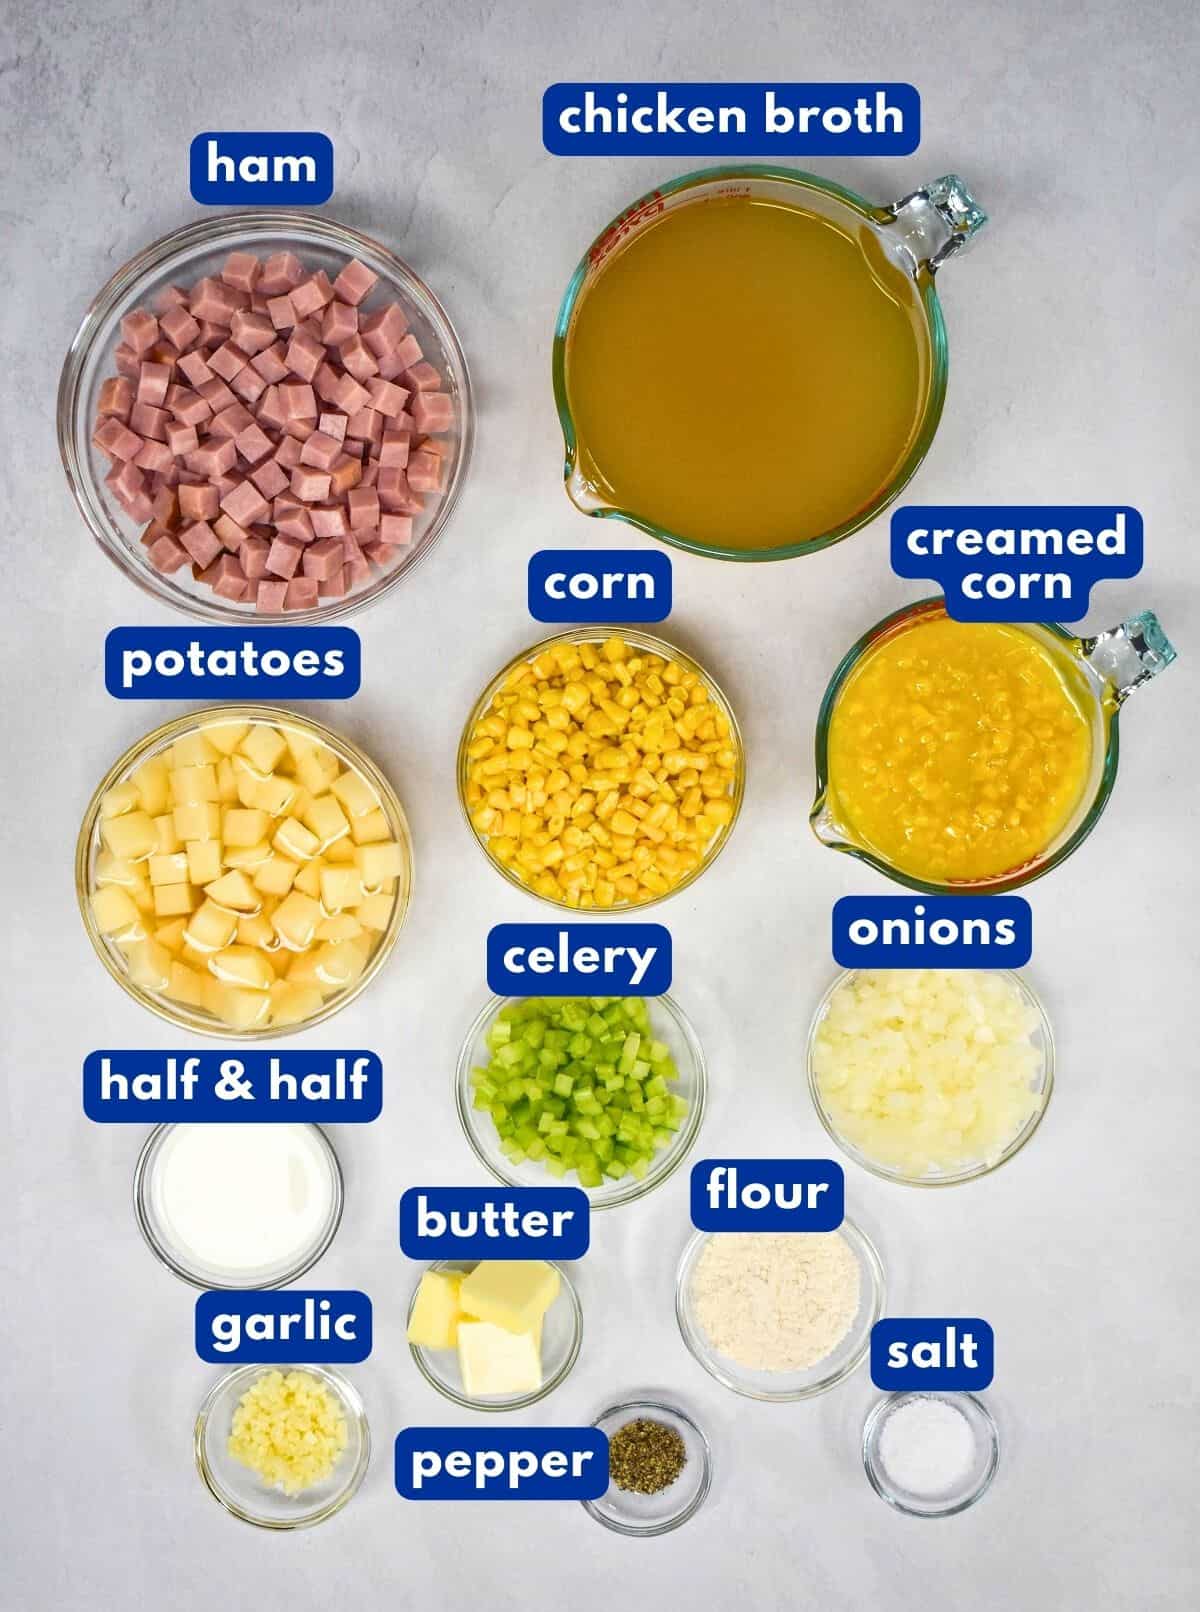 The ingredients for the chowder prepped and arranged in glass bowls on a white table with each labeled with a blue and white tag.